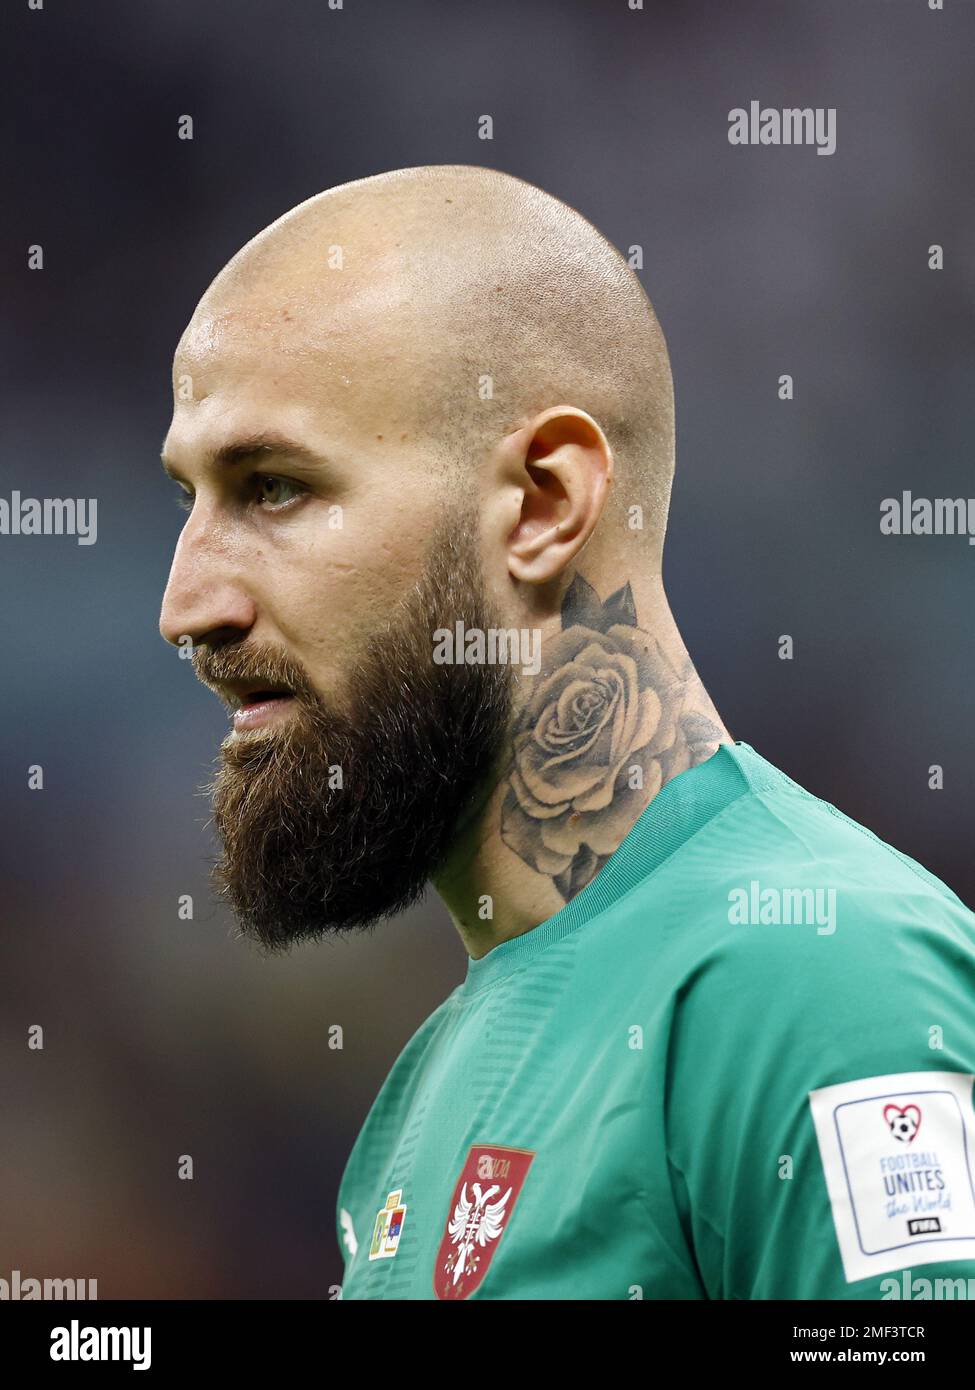 LUSAIL CITY - Serbia goalkeeper Vanja Milinkovic-Savic during the FIFA World Cup Qatar 2022 group G match between Brazil and Serbia at Lusail Stadium on November 24, 2022 in Lusail City, Qatar. AP | Dutch Height | MAURICE OF STONE Stock Photo